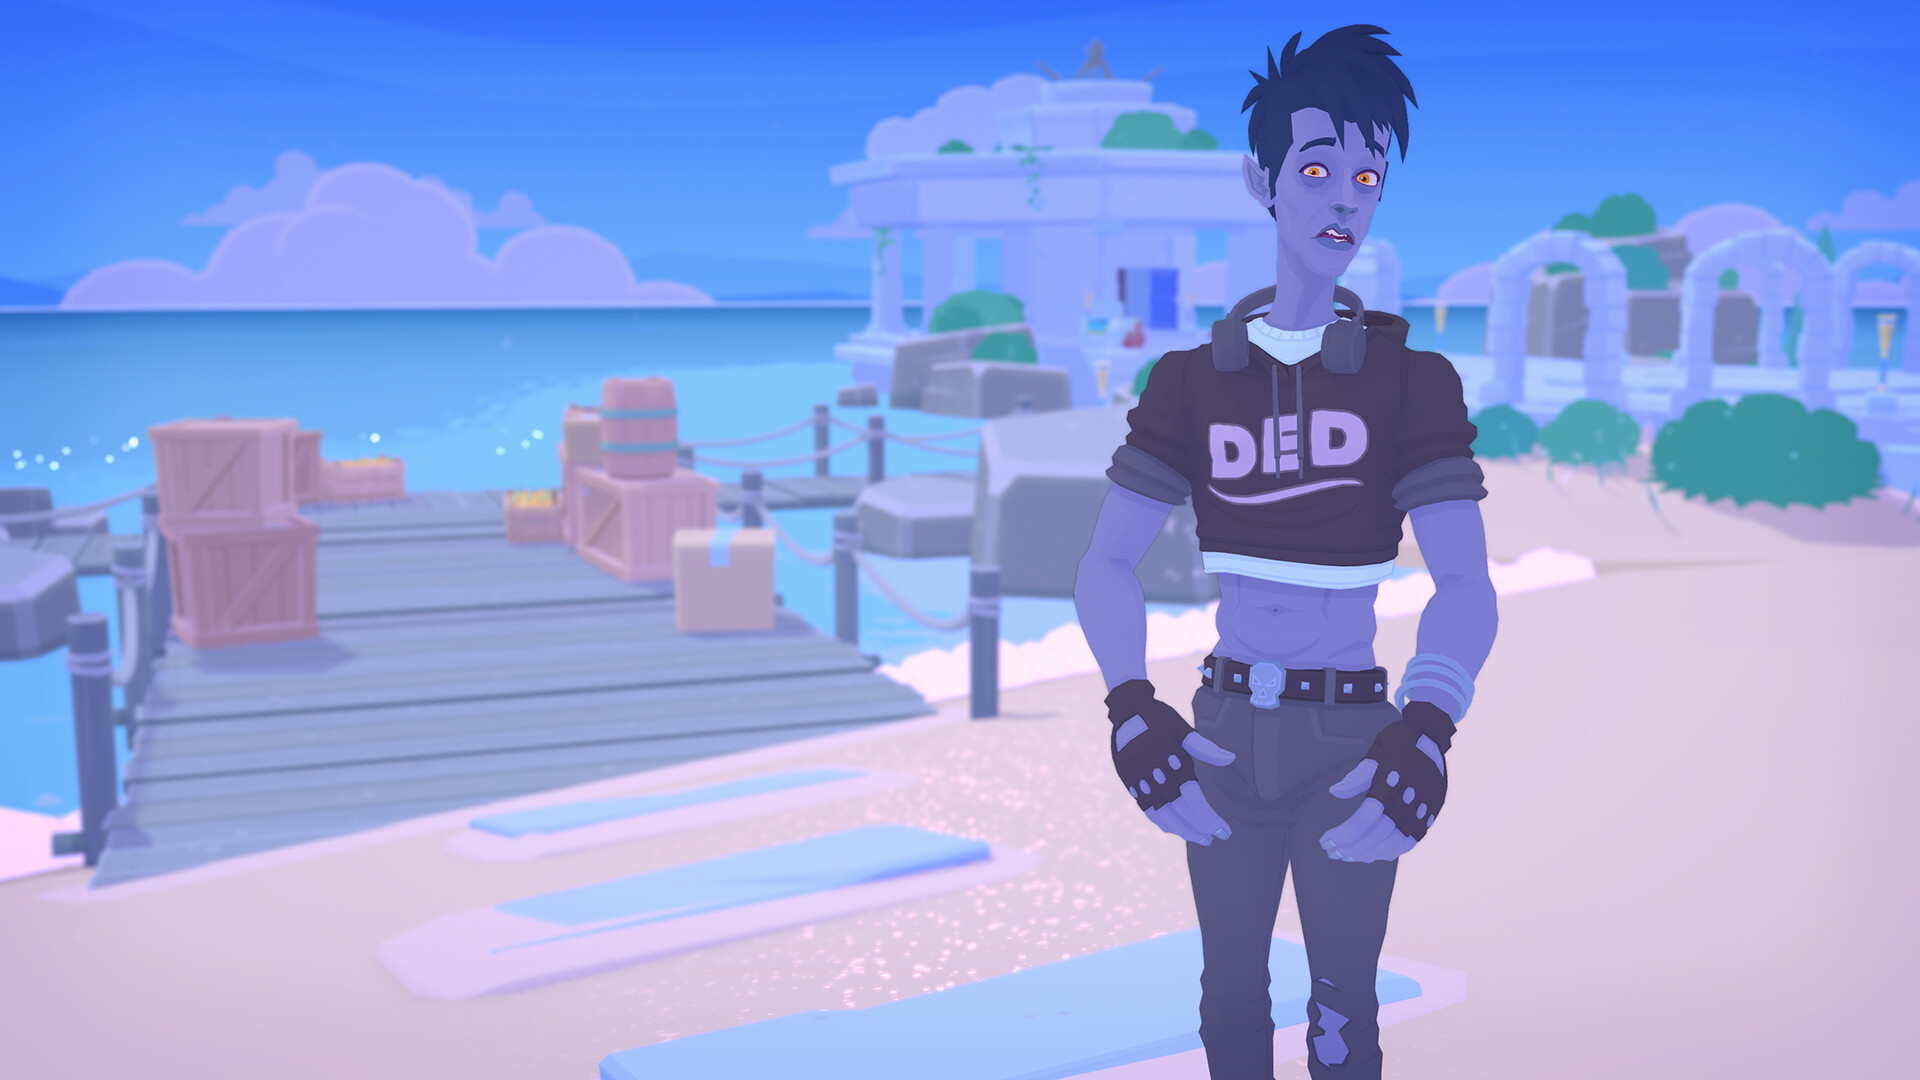 A screenshot from Mythwrecked: Ambrosia Island. A blue-skinned, blue haired man with abs and a cropped shirt that says "Ded" stands on a beach, in front of a dock.